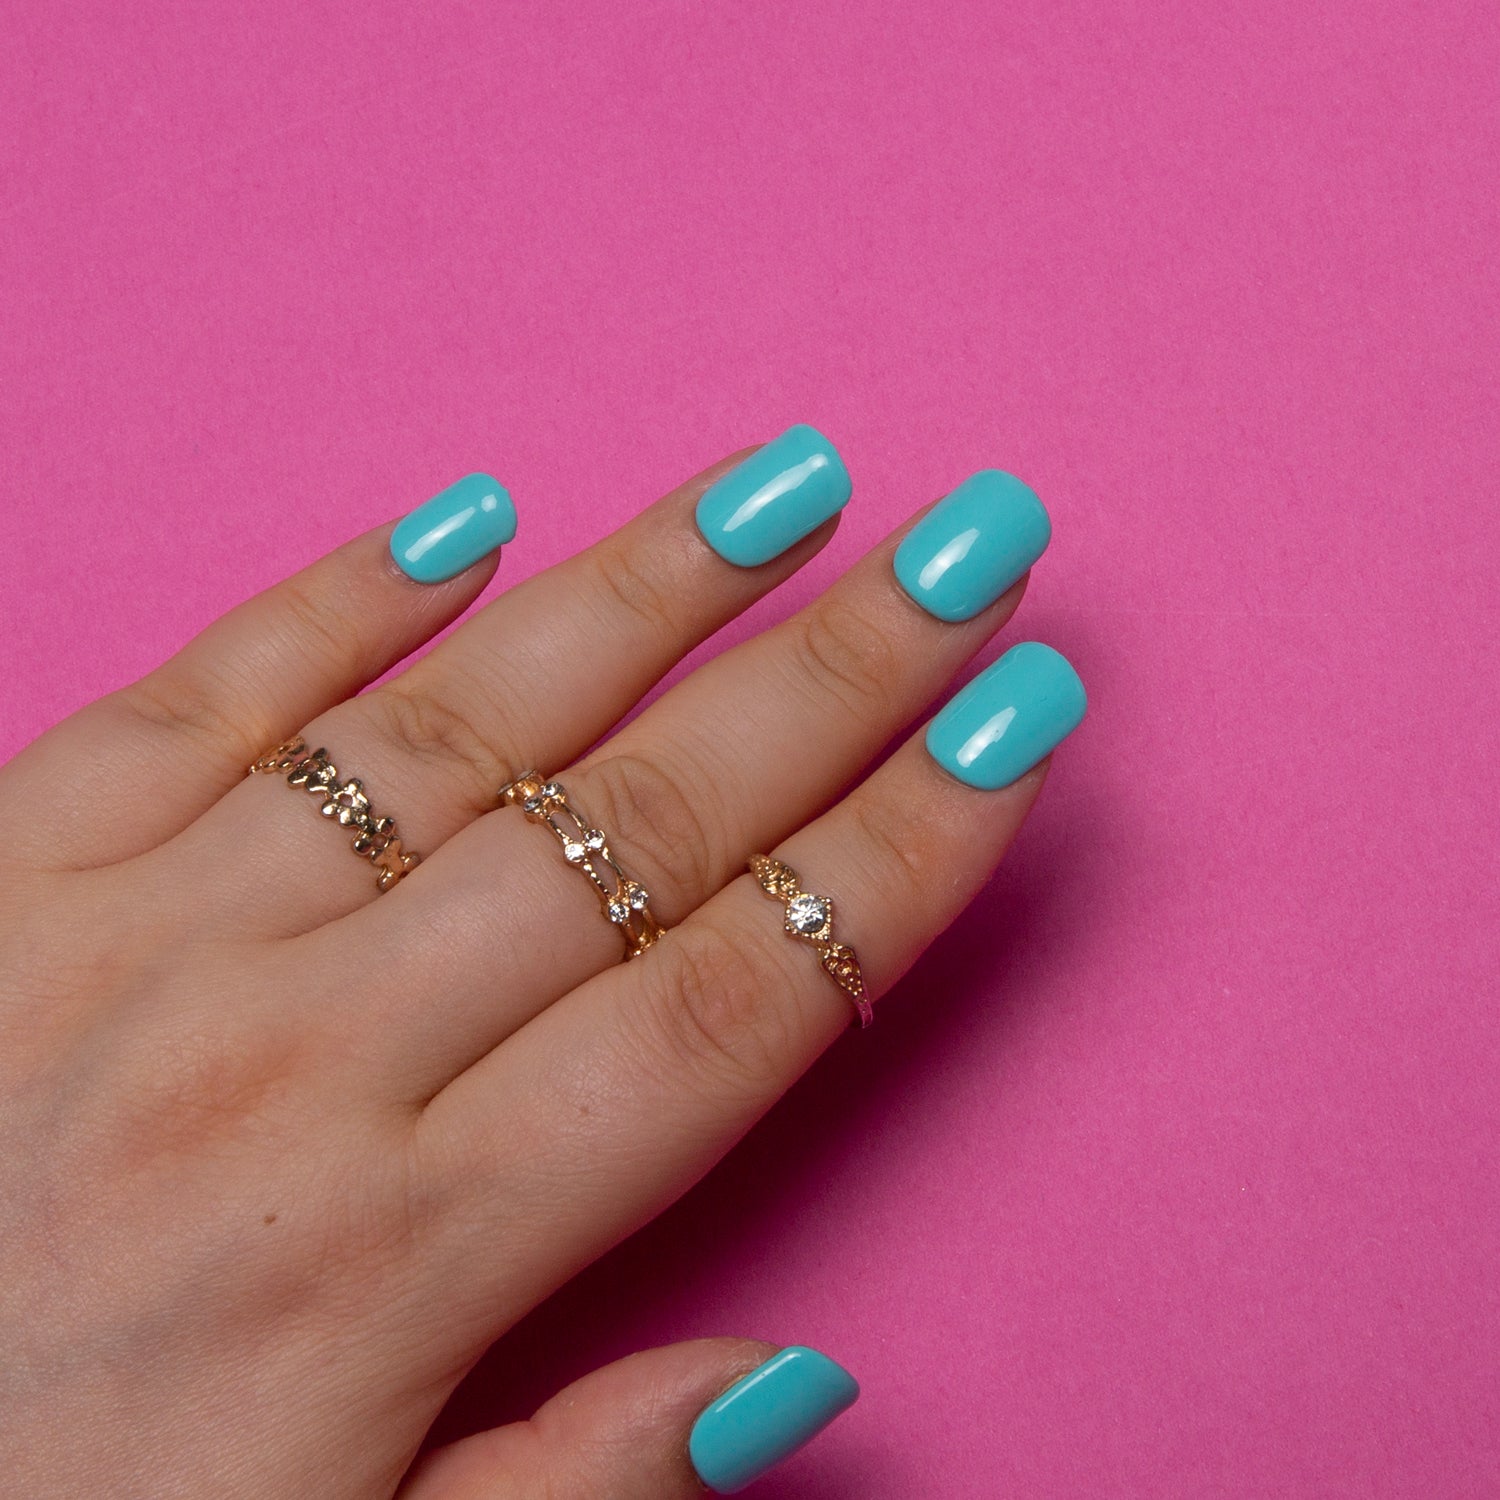 Hand with shiny blue square-shaped press-on nails from Lovful.com against a pink background. The hand is wearing gold rings with small gemstones, showcasing the 'Shiny Blue' nail design which captures the essence of seaside getaway and beach vibes.